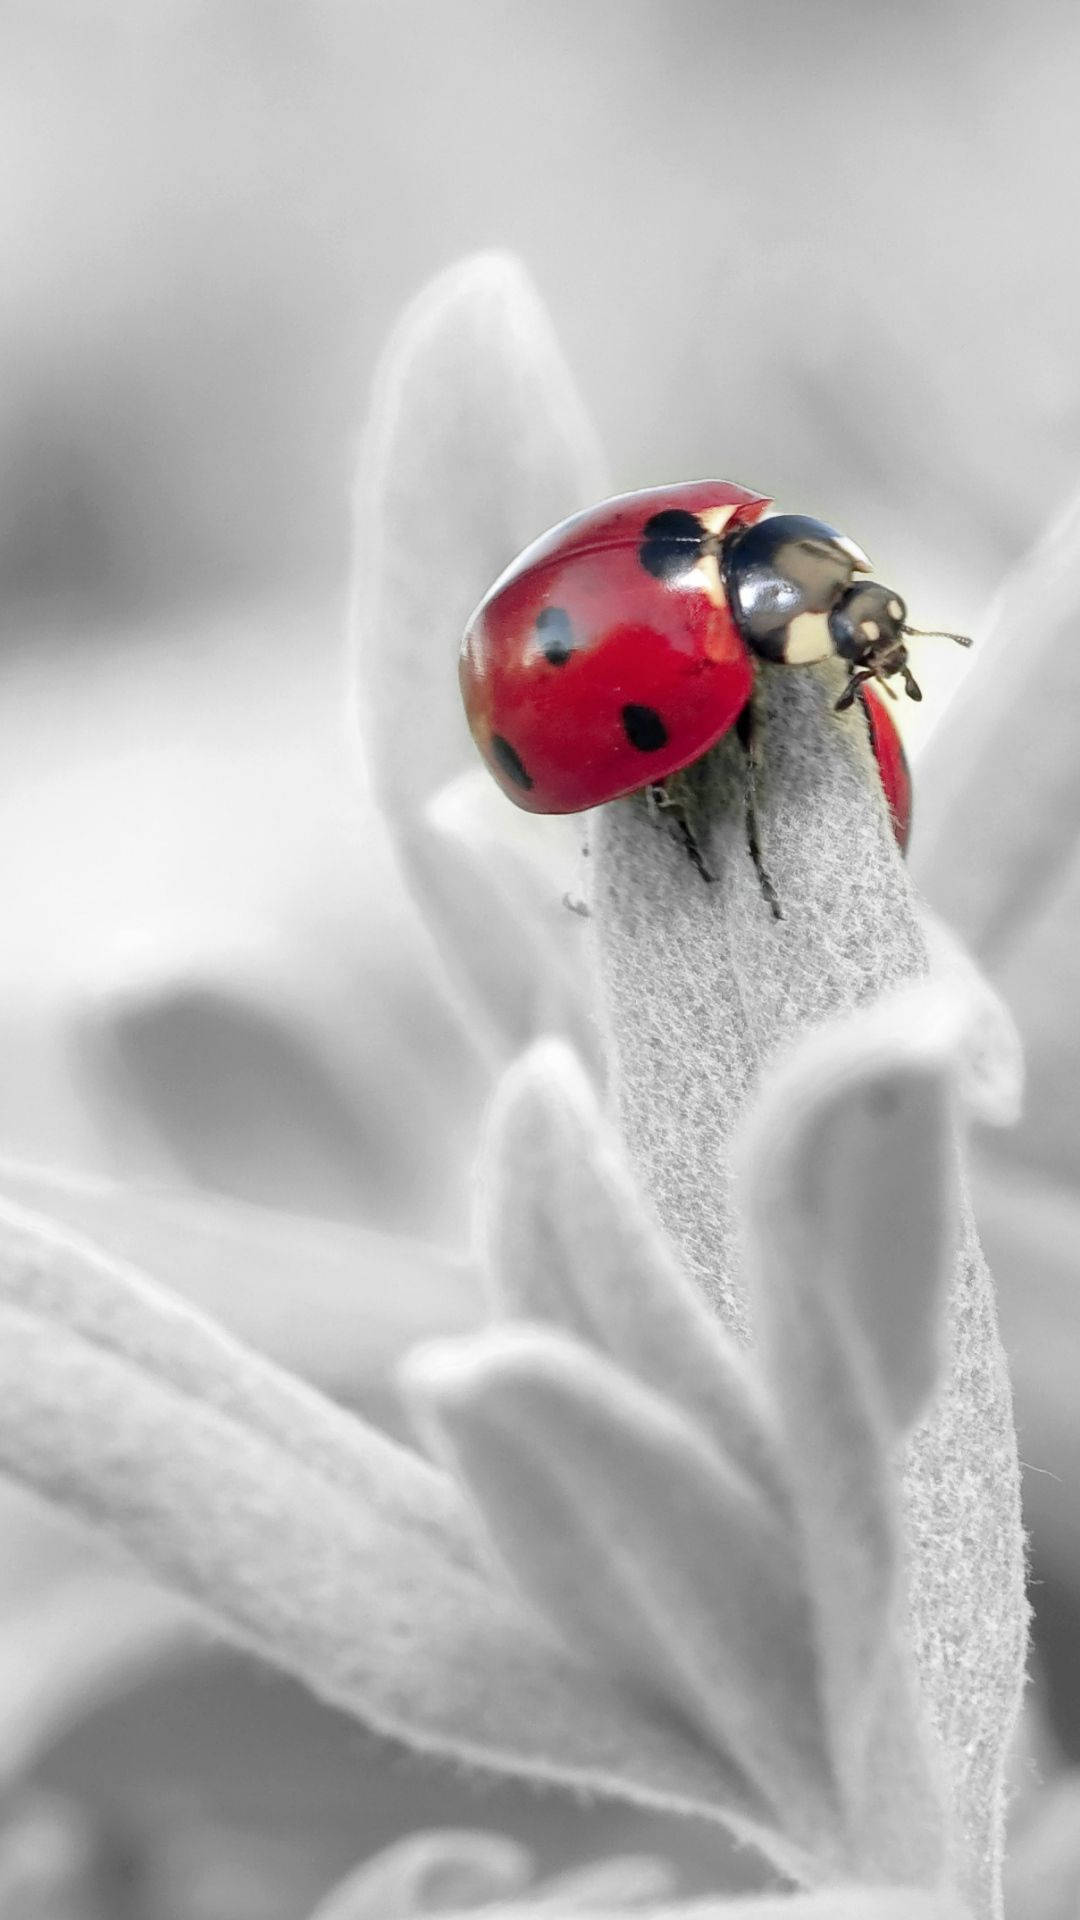 Red Ladybug With Black Dots